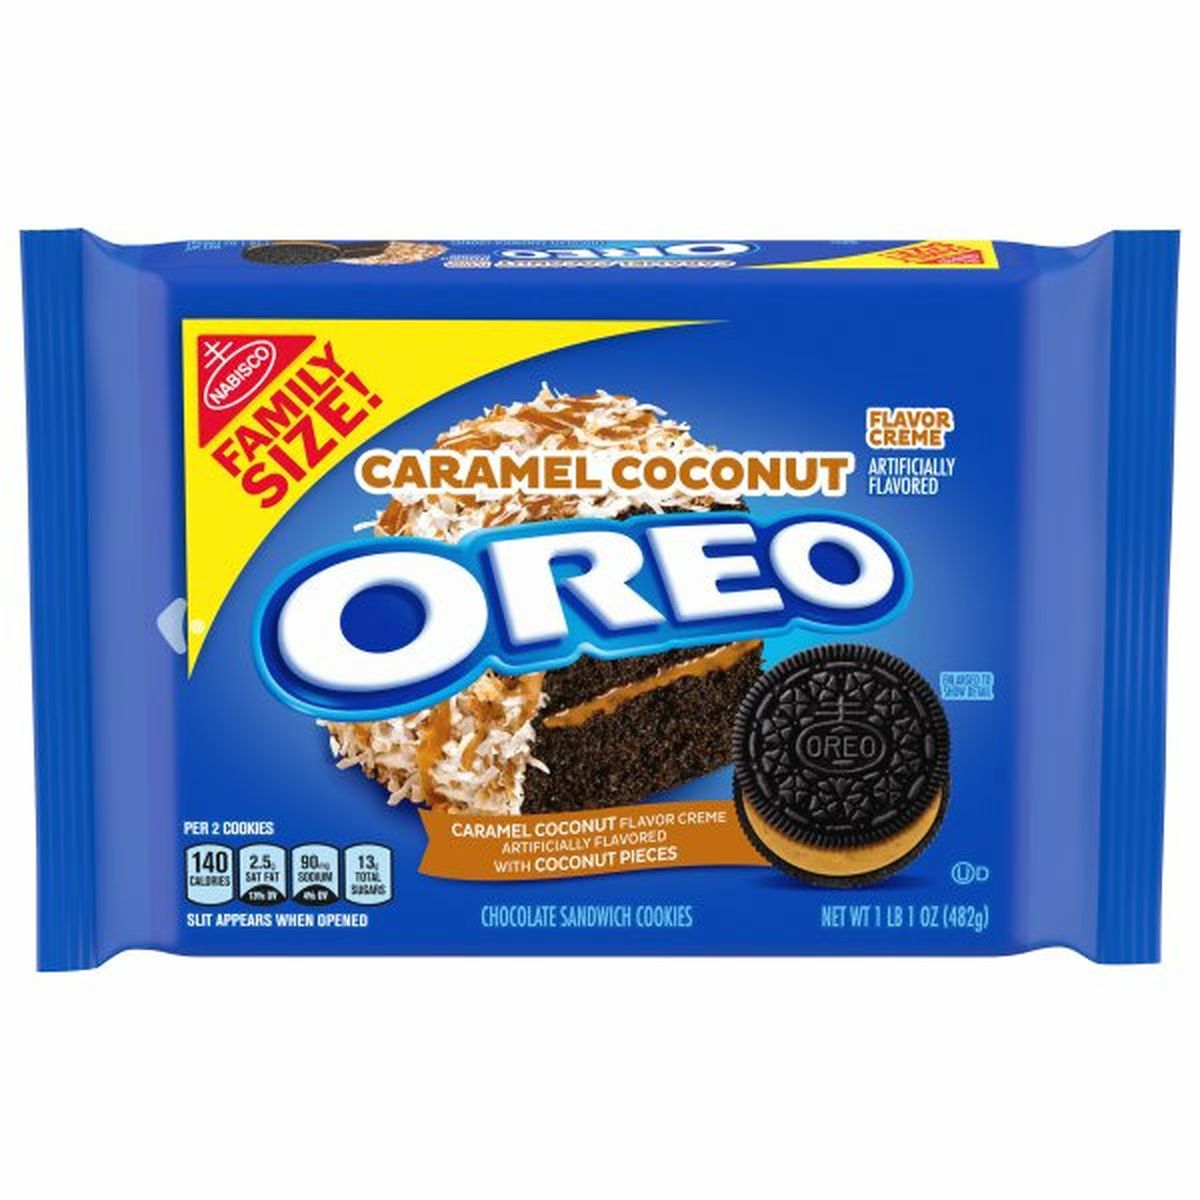 Calories in Nabisco Chocolate Sandwich Cookies, Caramel Coconut Flavor Creme, Family Size!